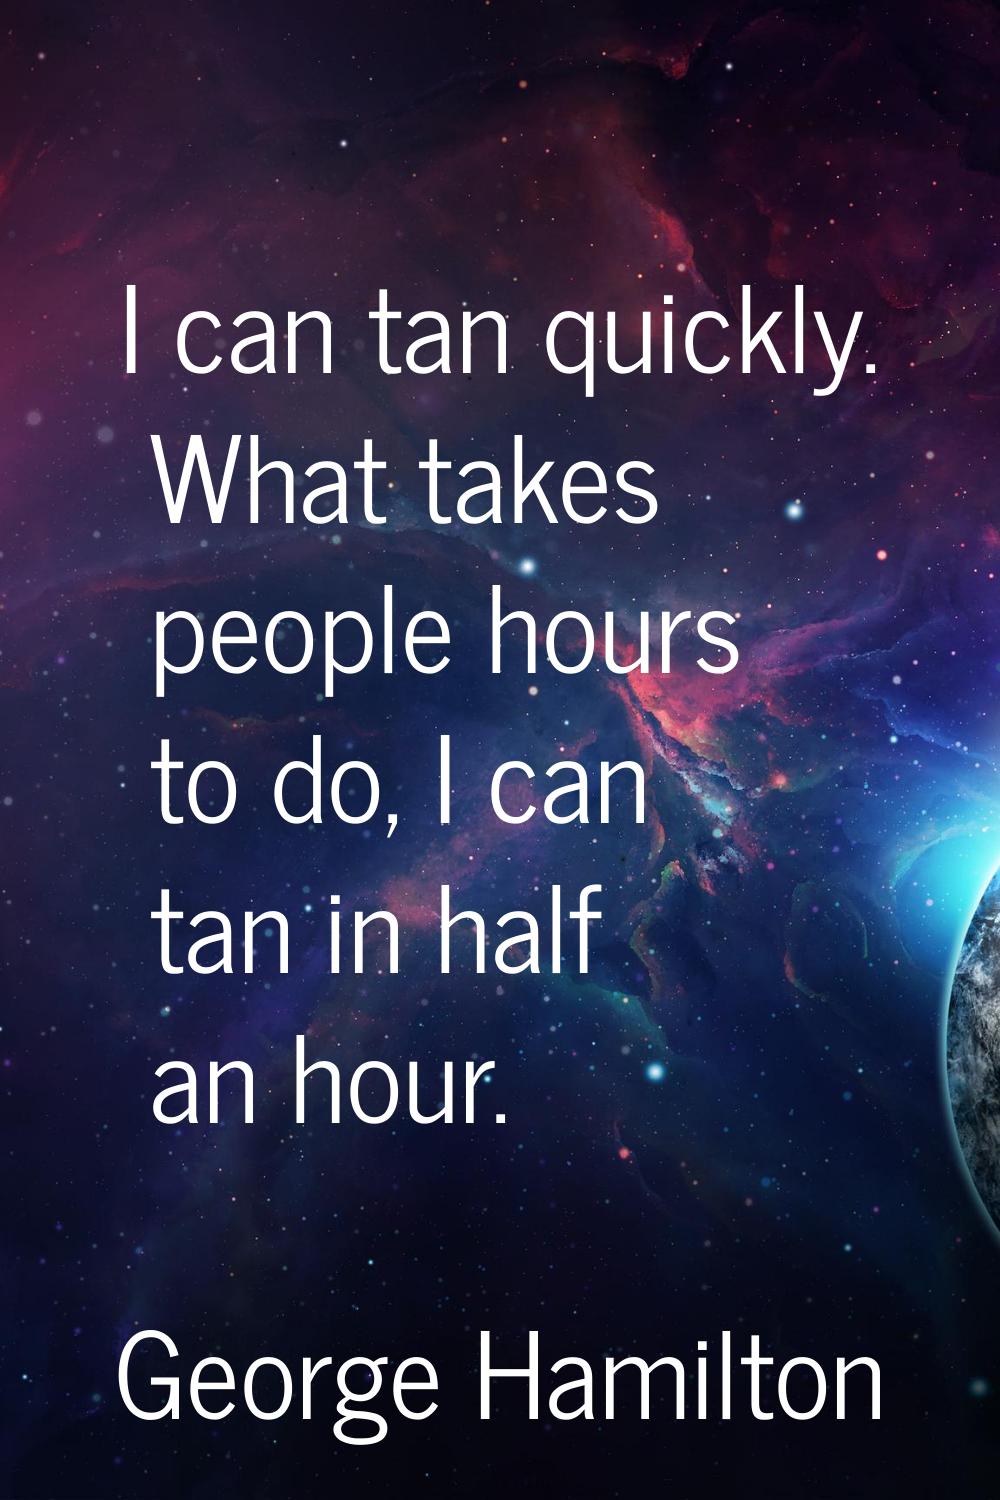 I can tan quickly. What takes people hours to do, I can tan in half an hour.